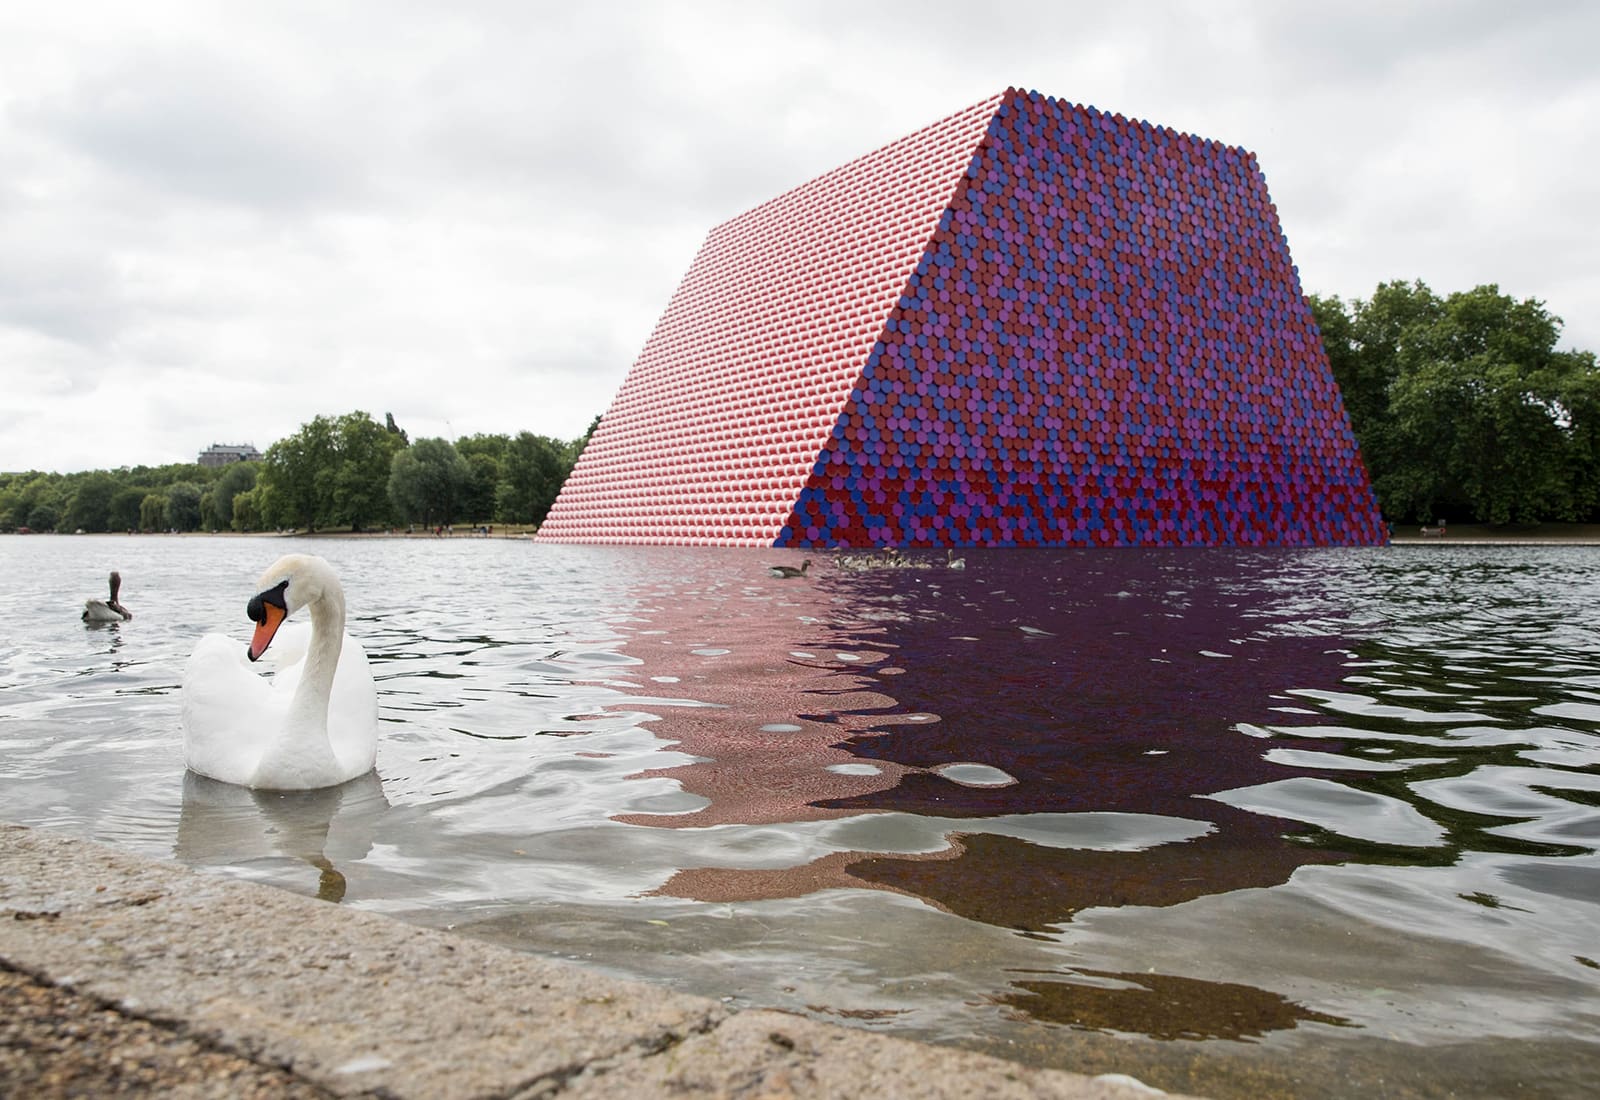 Christo's temporary sculpture in Hyde Park, London, "The London Mastaba," located in Serpentine Lake, Hyde Park during summer of 2018.